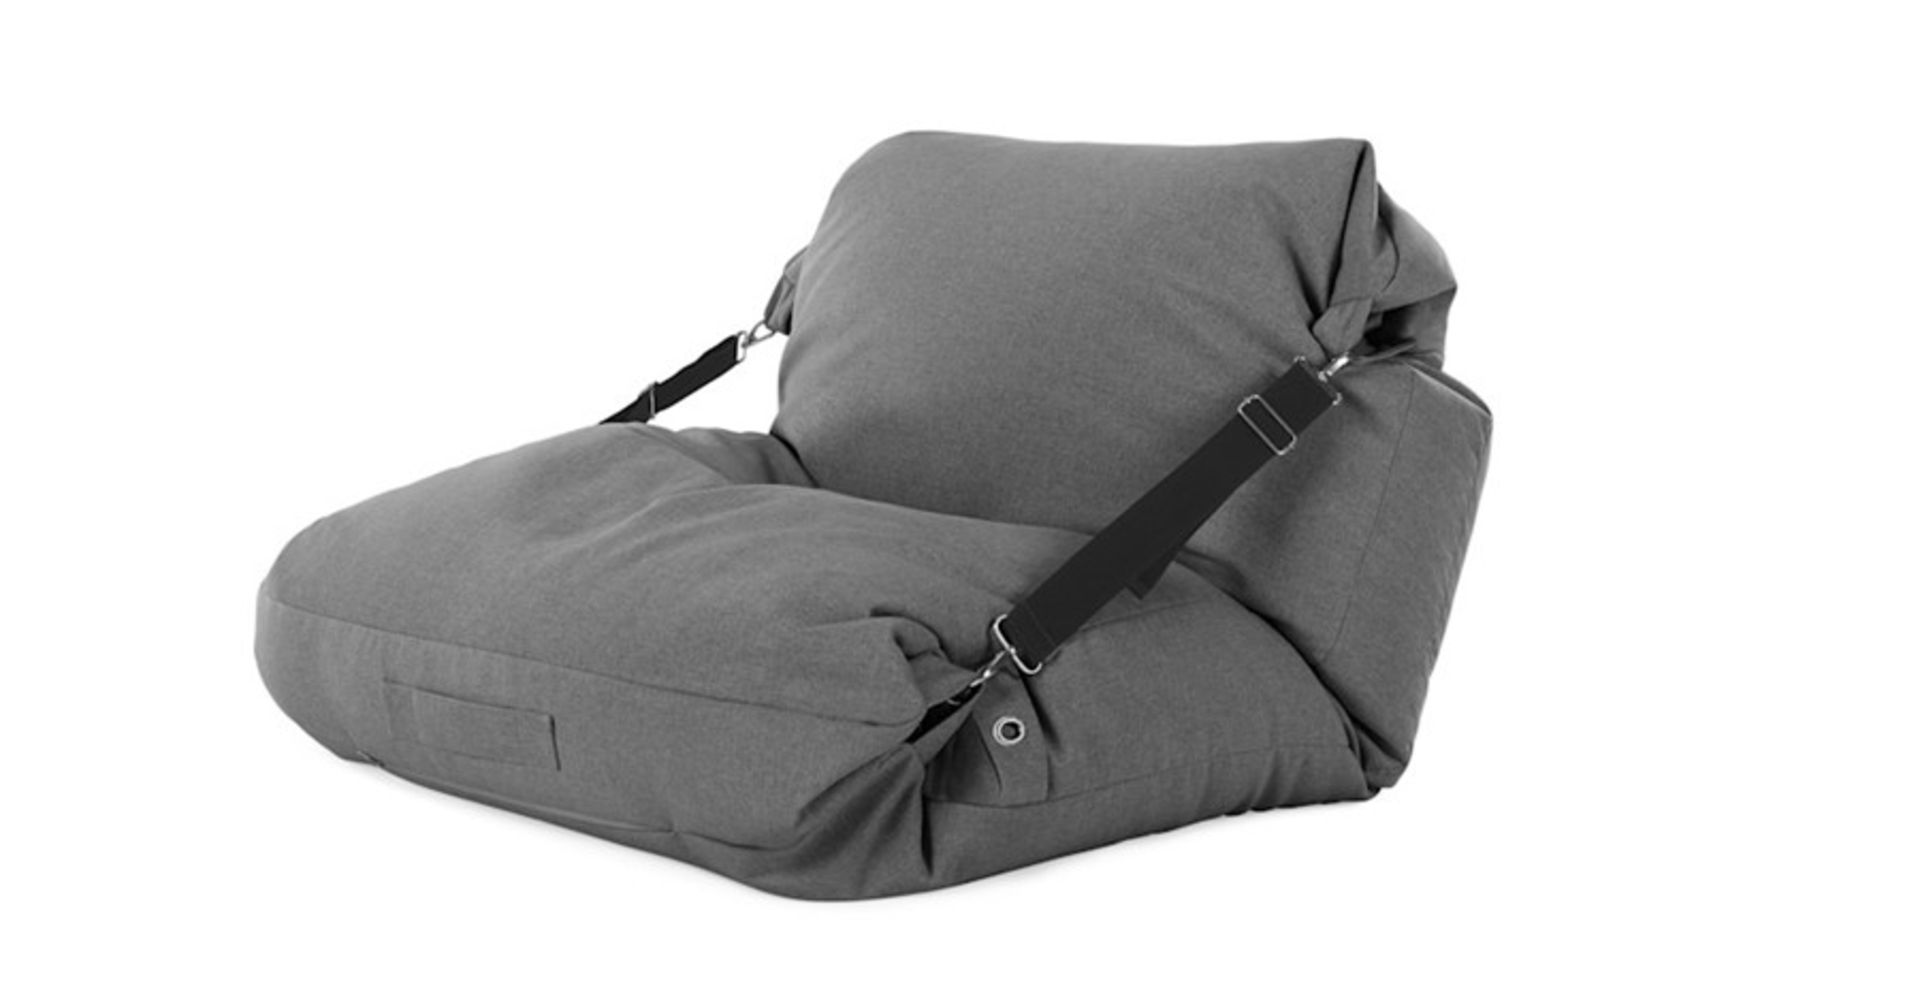 1 GRADE A PACKAGED MADE+ TUCK BEAN BAG FLOOR CHAIR IN MARL GREY WITH CONTRAST BLACK STAPS / RRP £